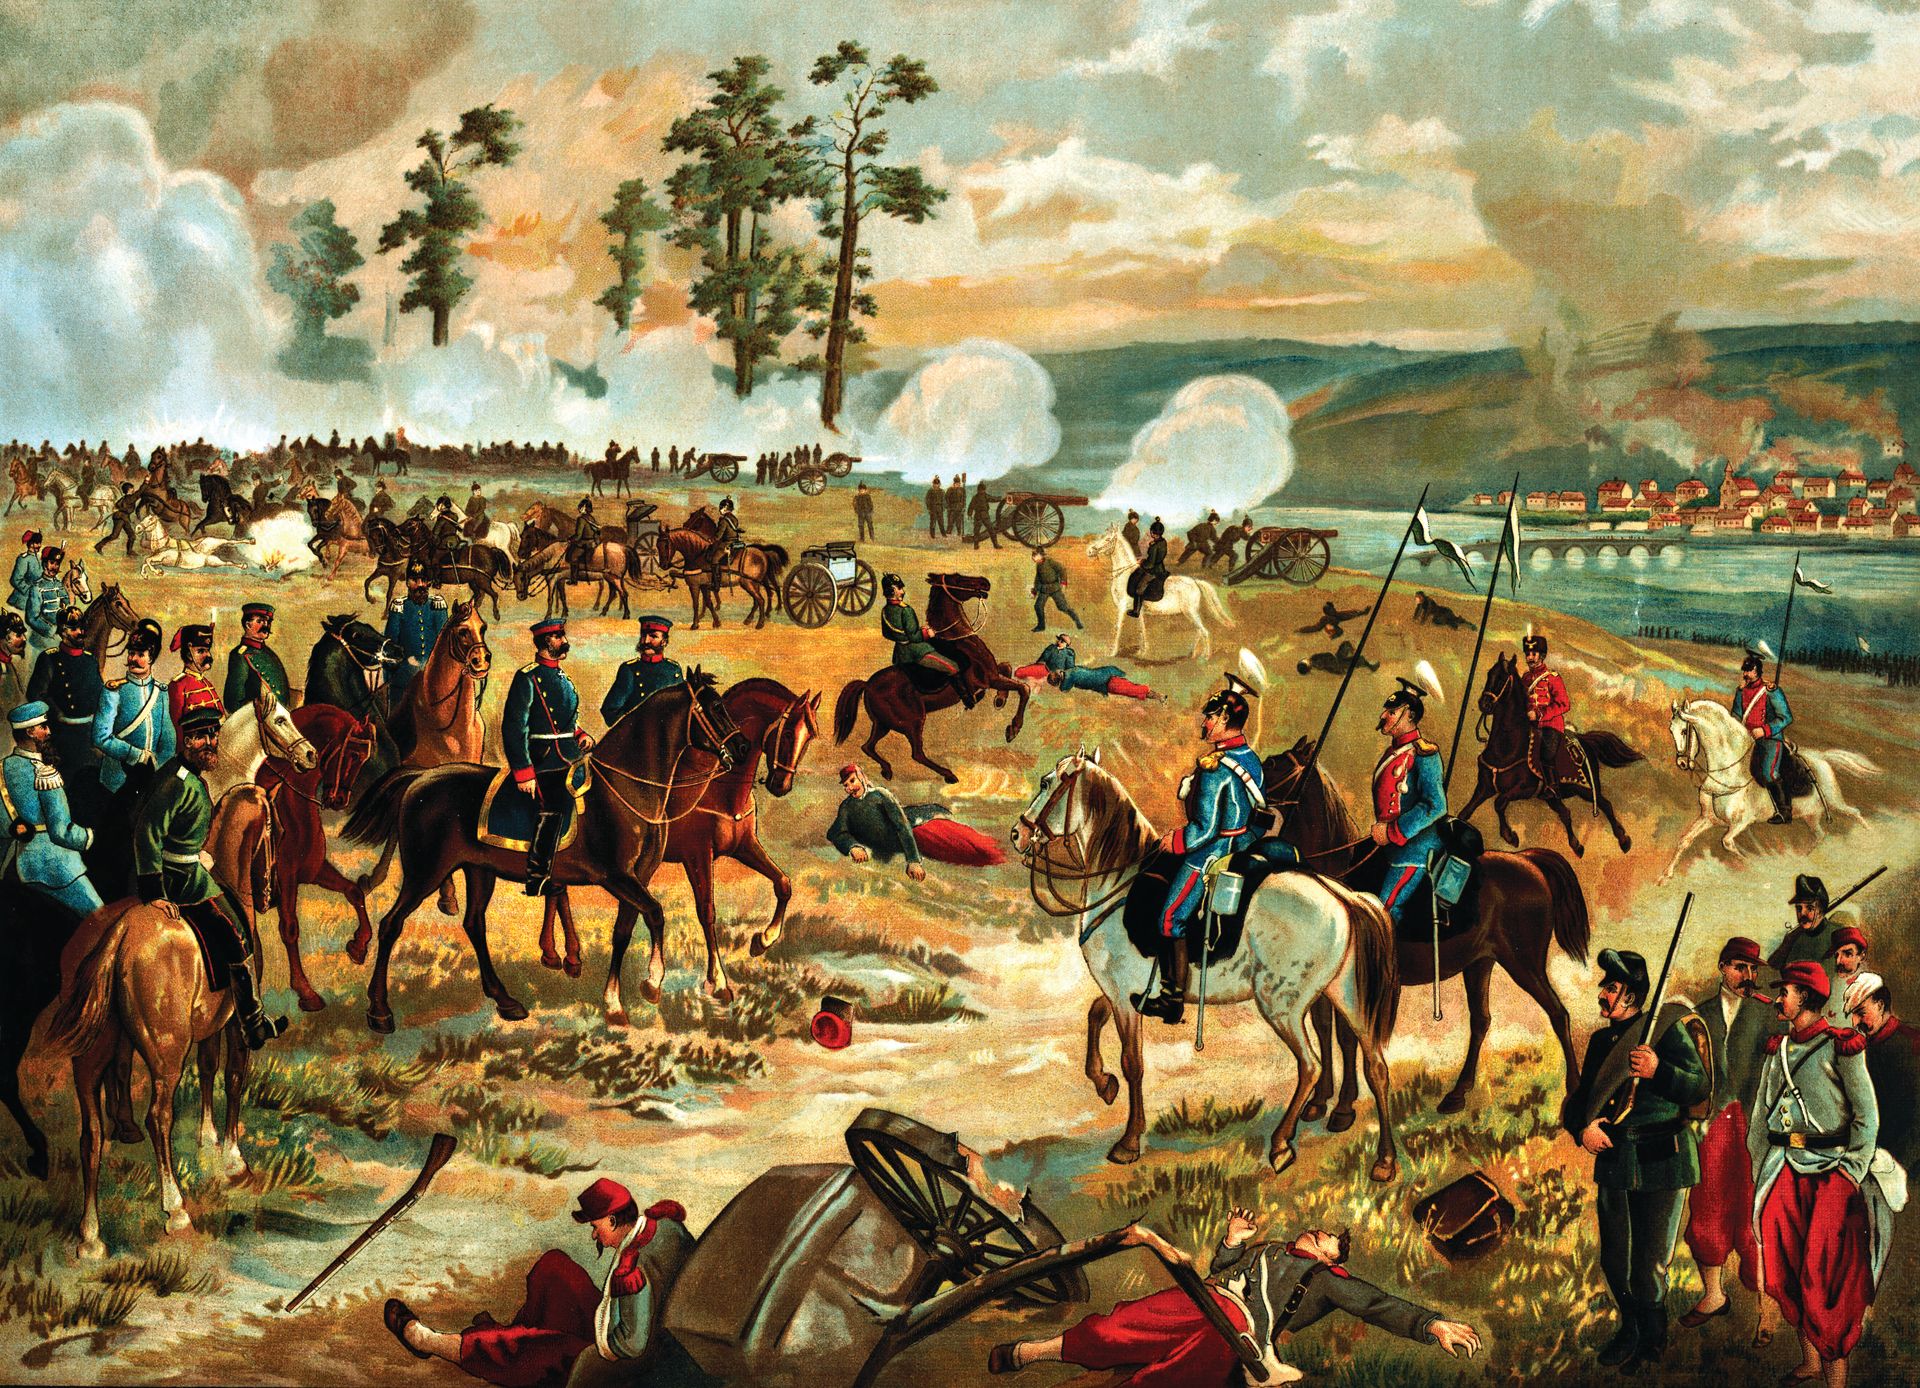 Prussian Field Marshal Helmuth von Moltke directed the swift advance of the Prussians through northeastern France. The Prussians overtook the retreating French at Beaumont, forcing them to withdraw to Sedan. 